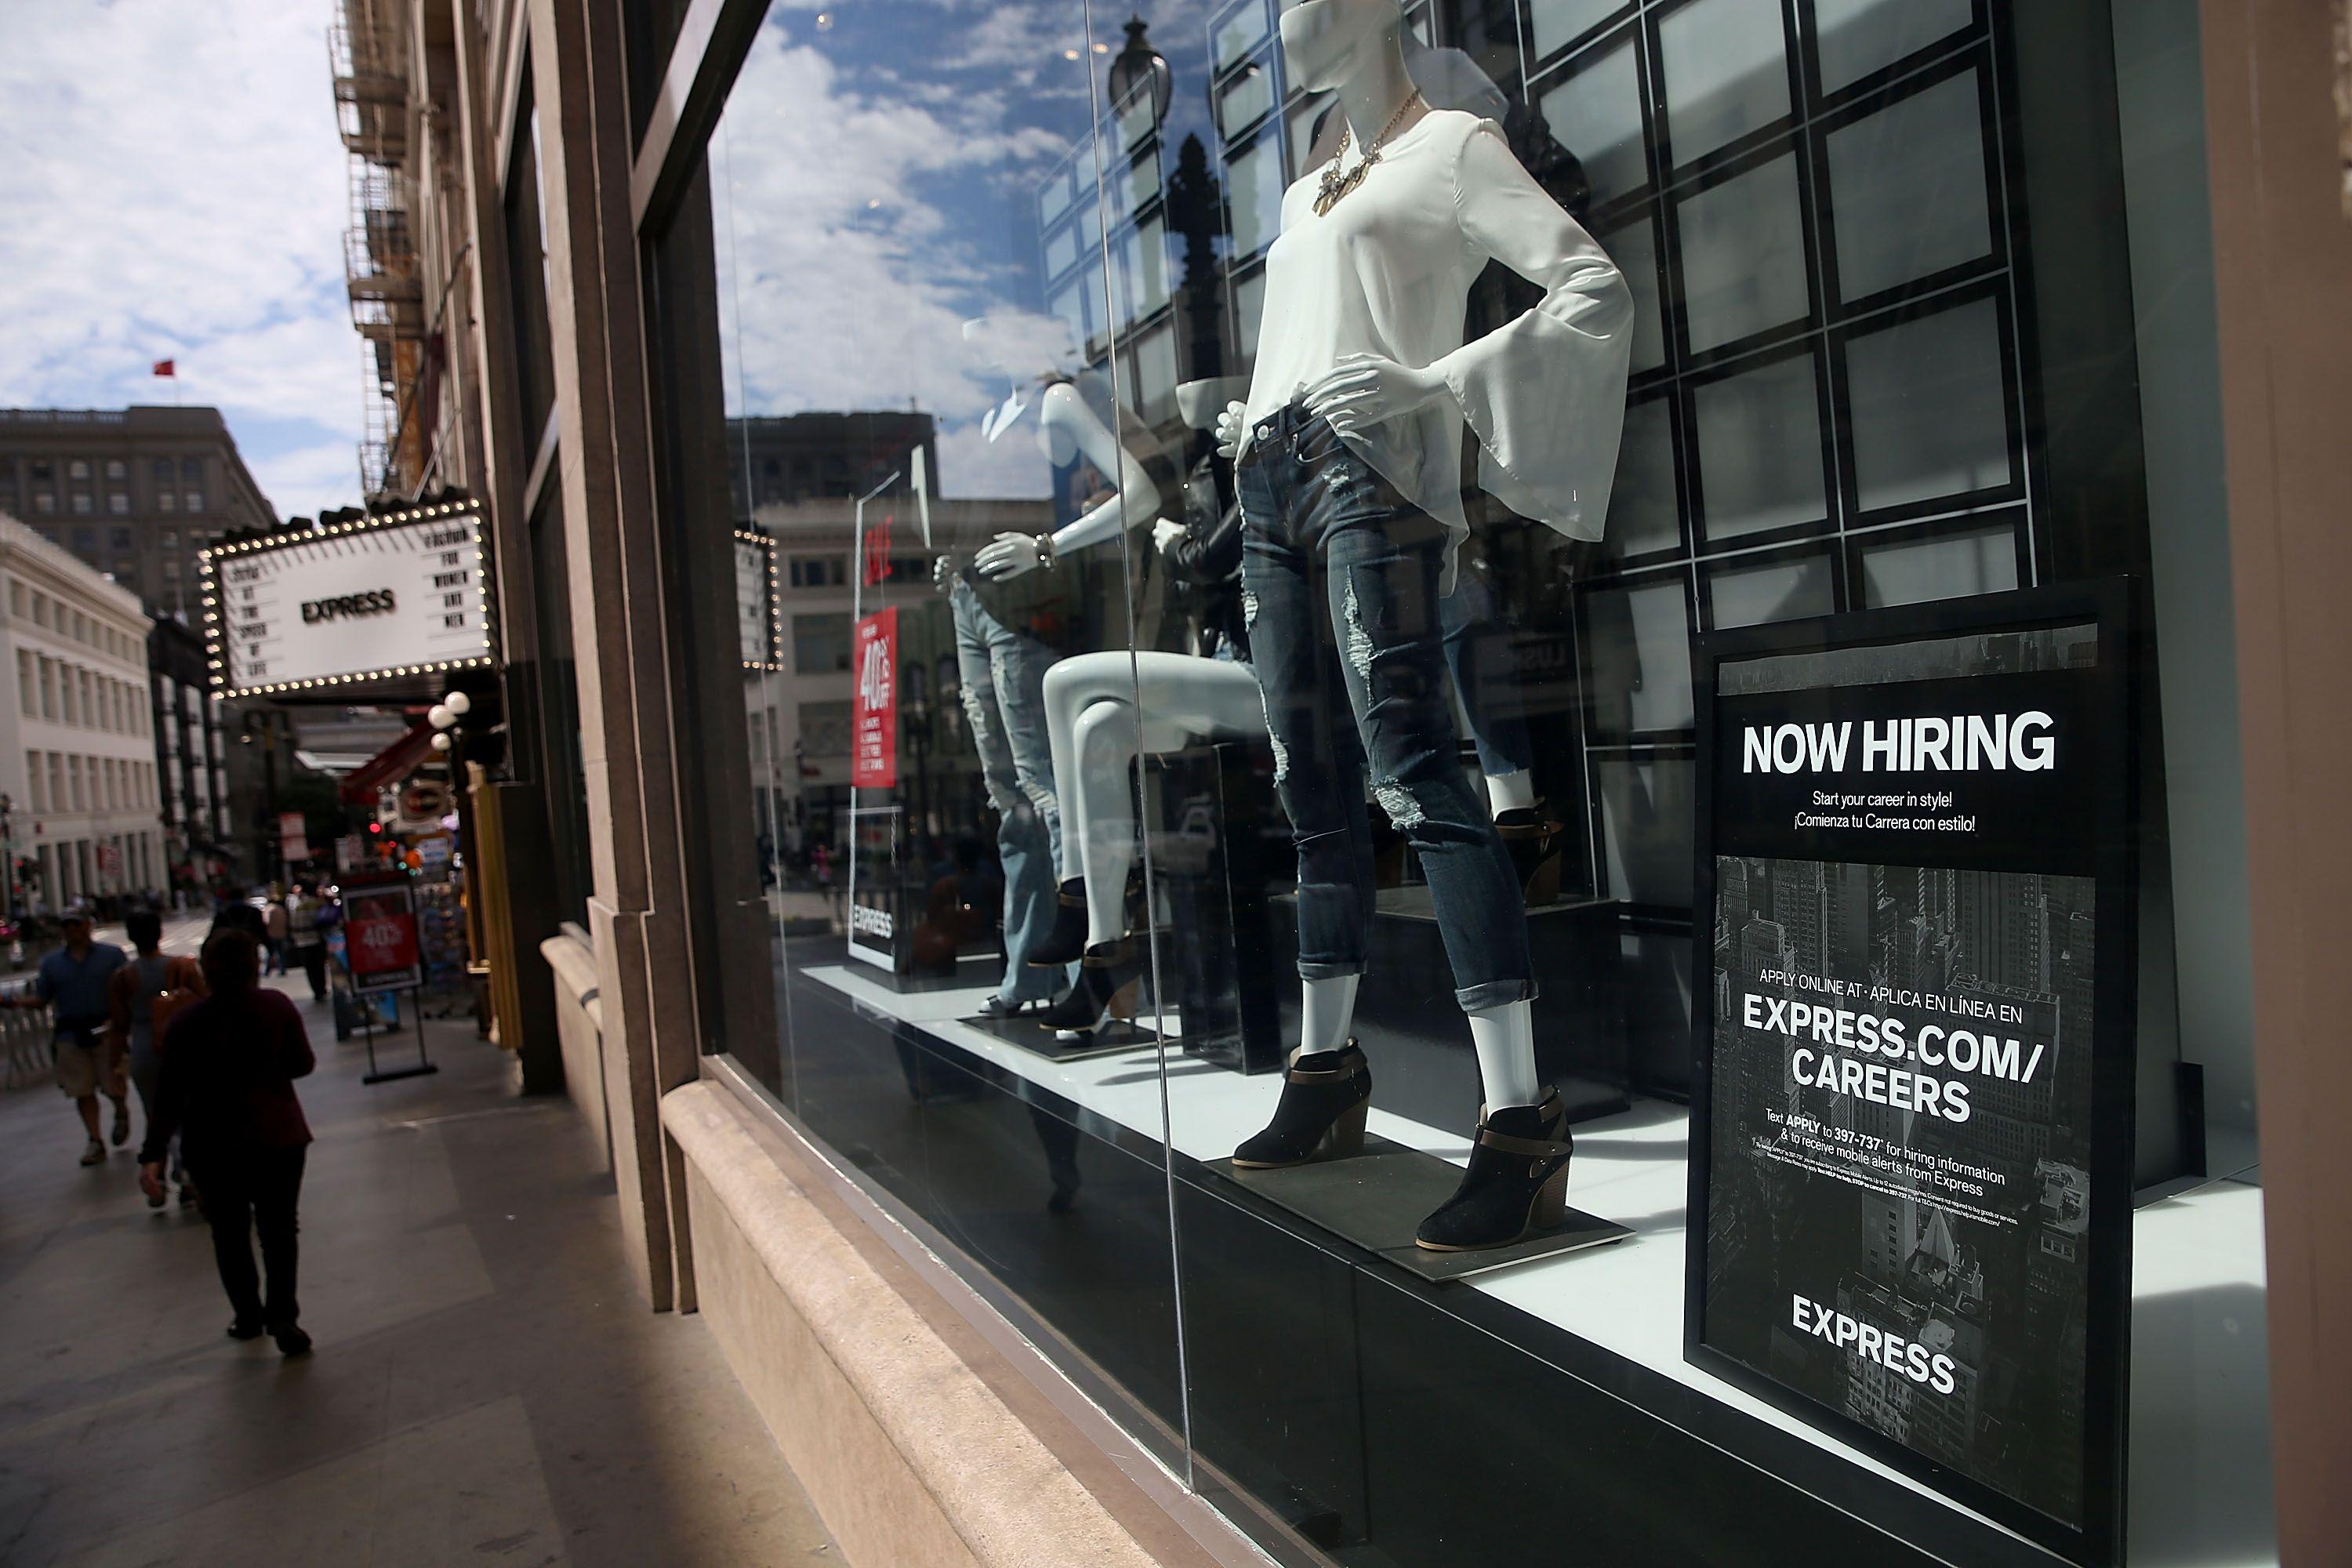 Express Clothing Store Logo - Clothing Sales at Express Tumbled More Than Expected Last Quarter ...